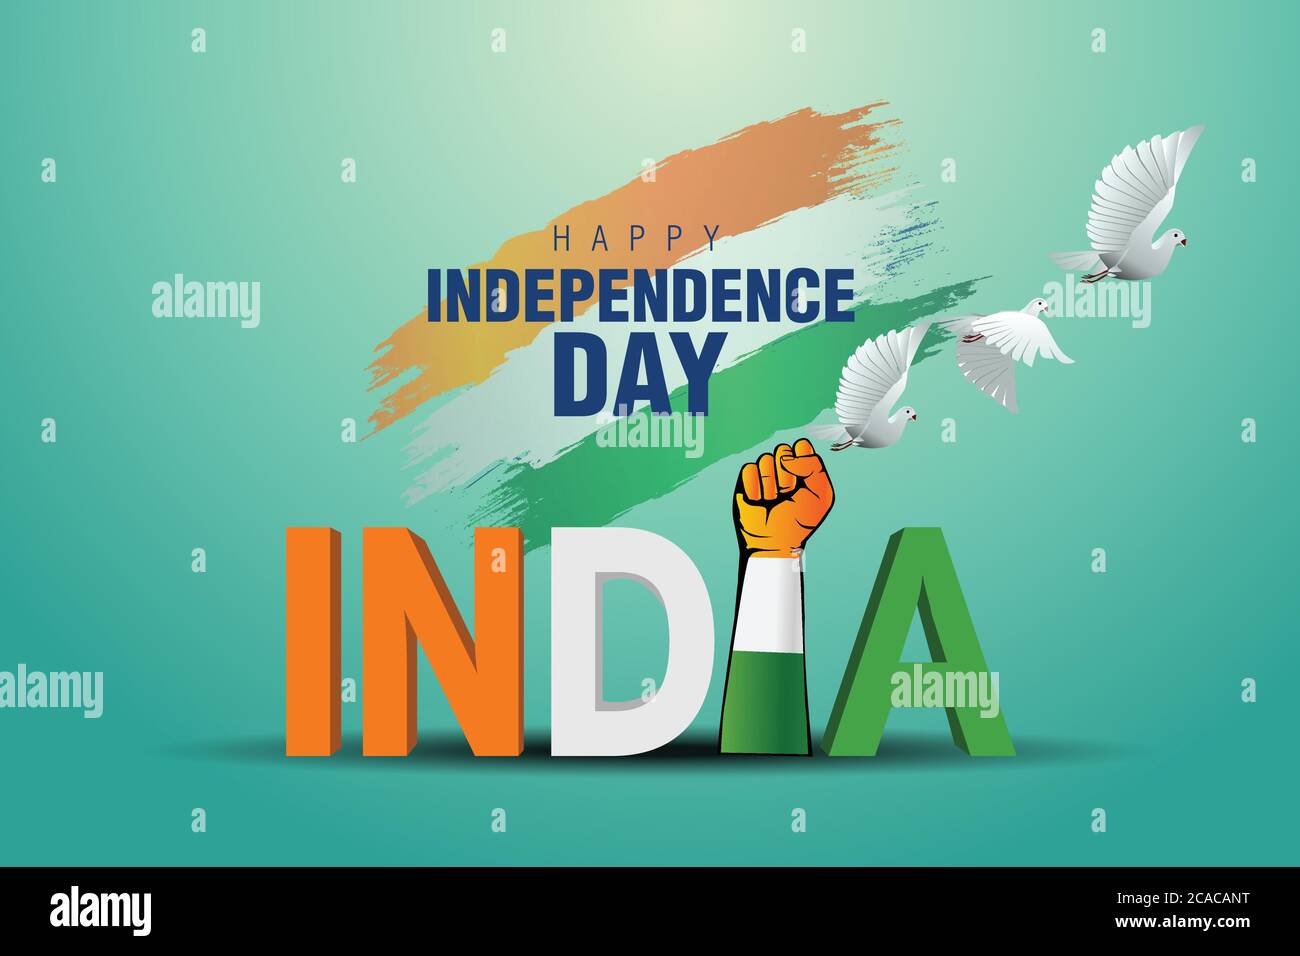 Indian happy Independence Day celebrations with stylish 3d india text and flying pigeon. Stock Vector